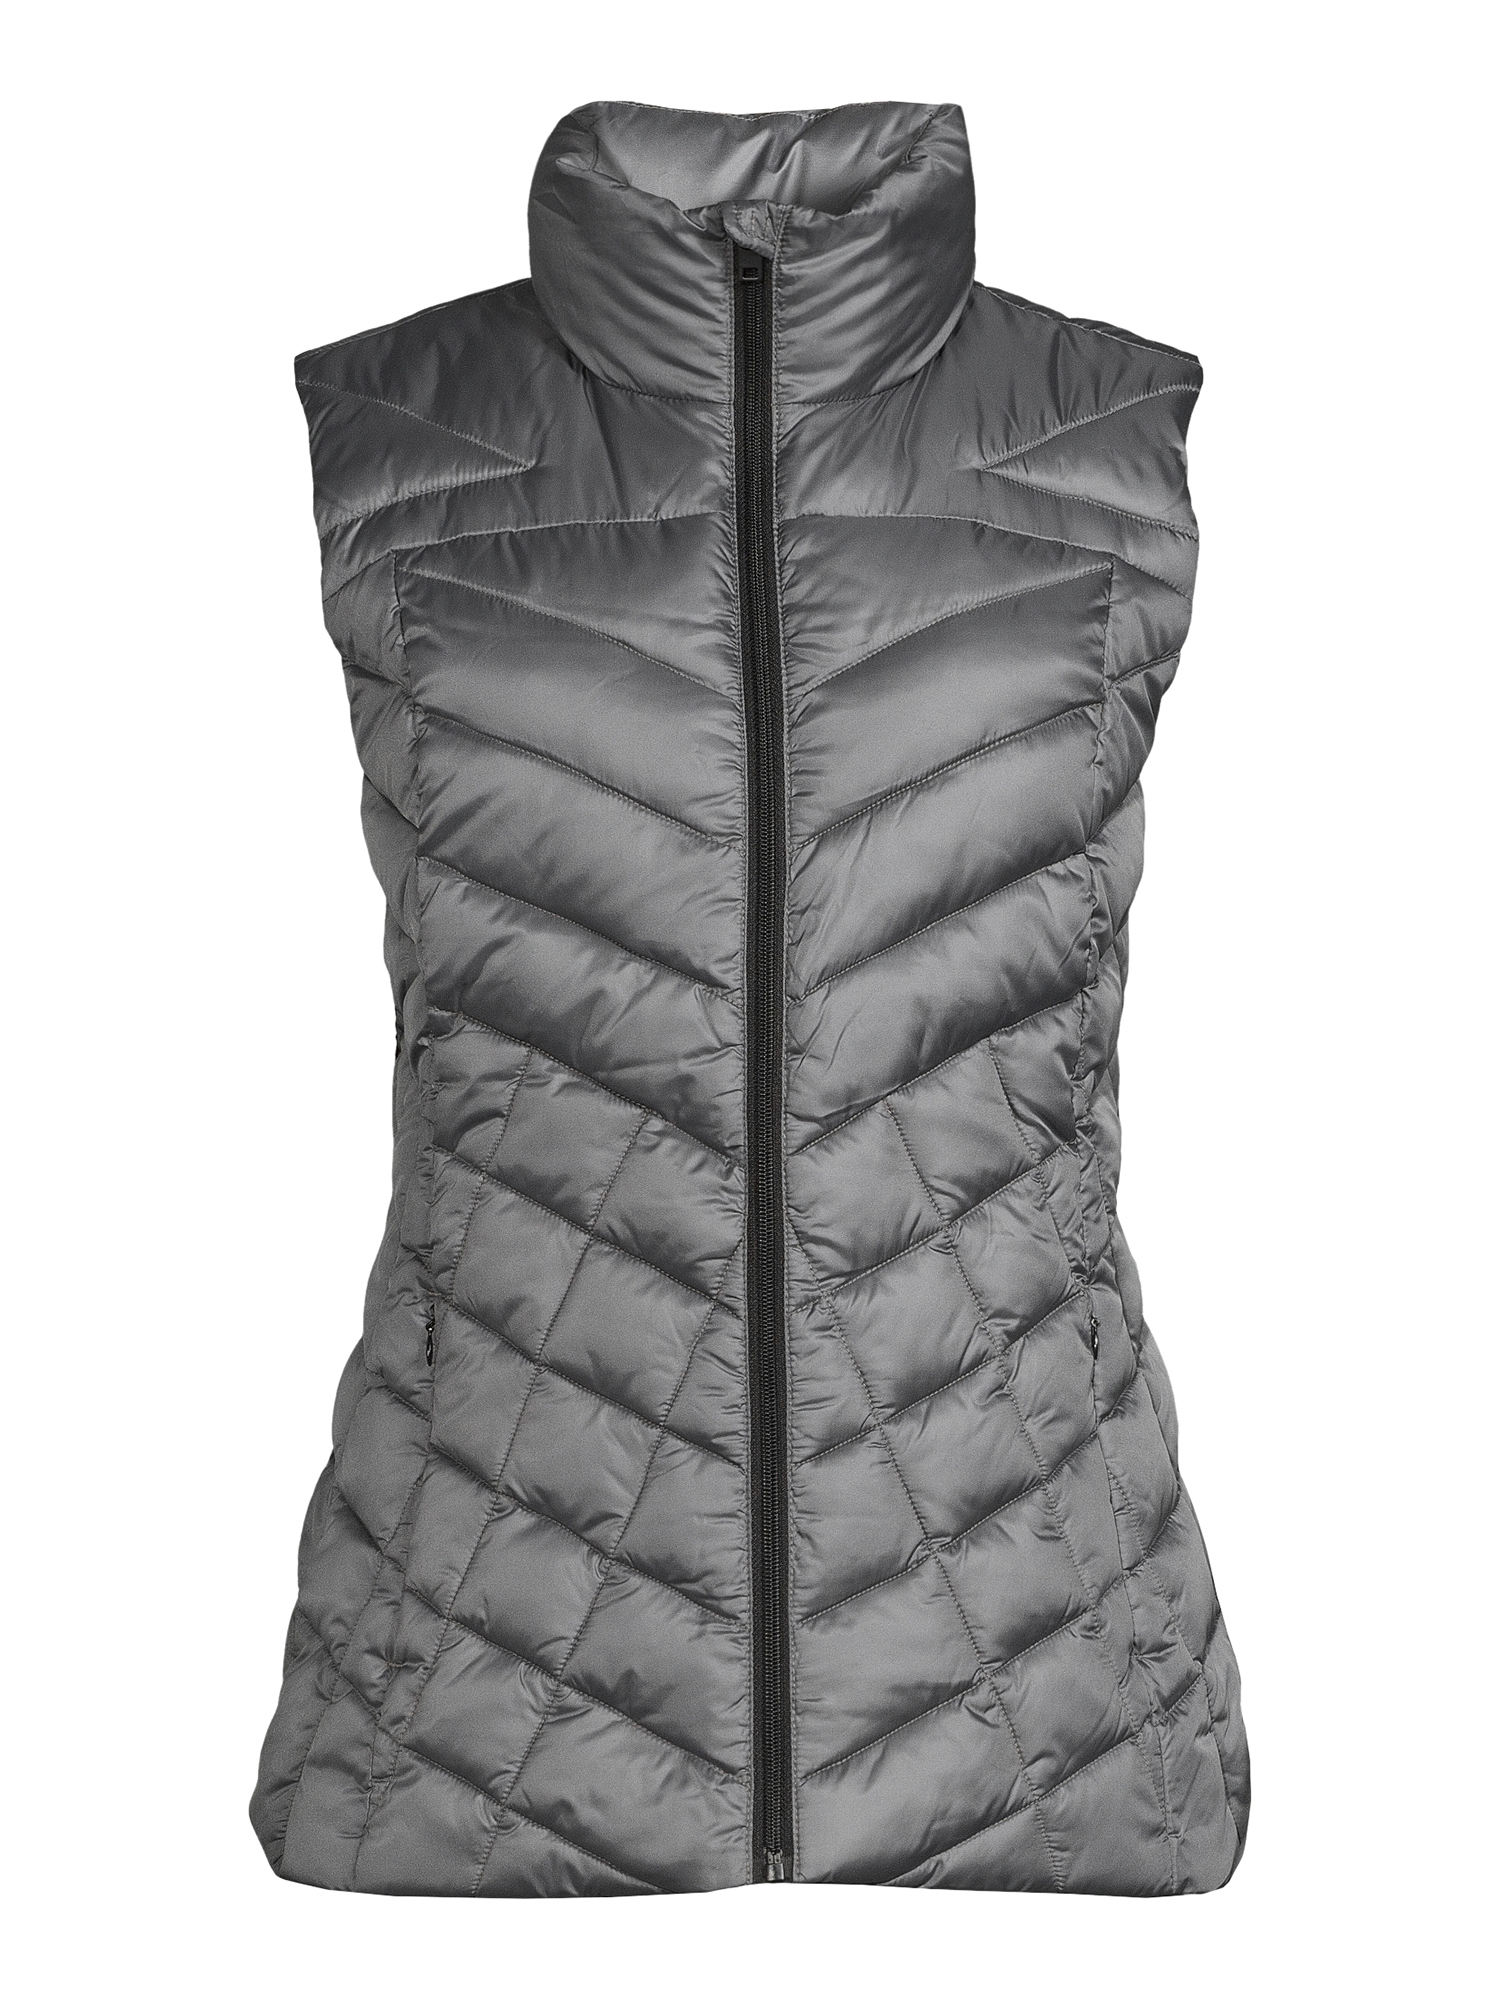 Big Chill Women's Chevron Quilted Puffer Vest - image 5 of 5